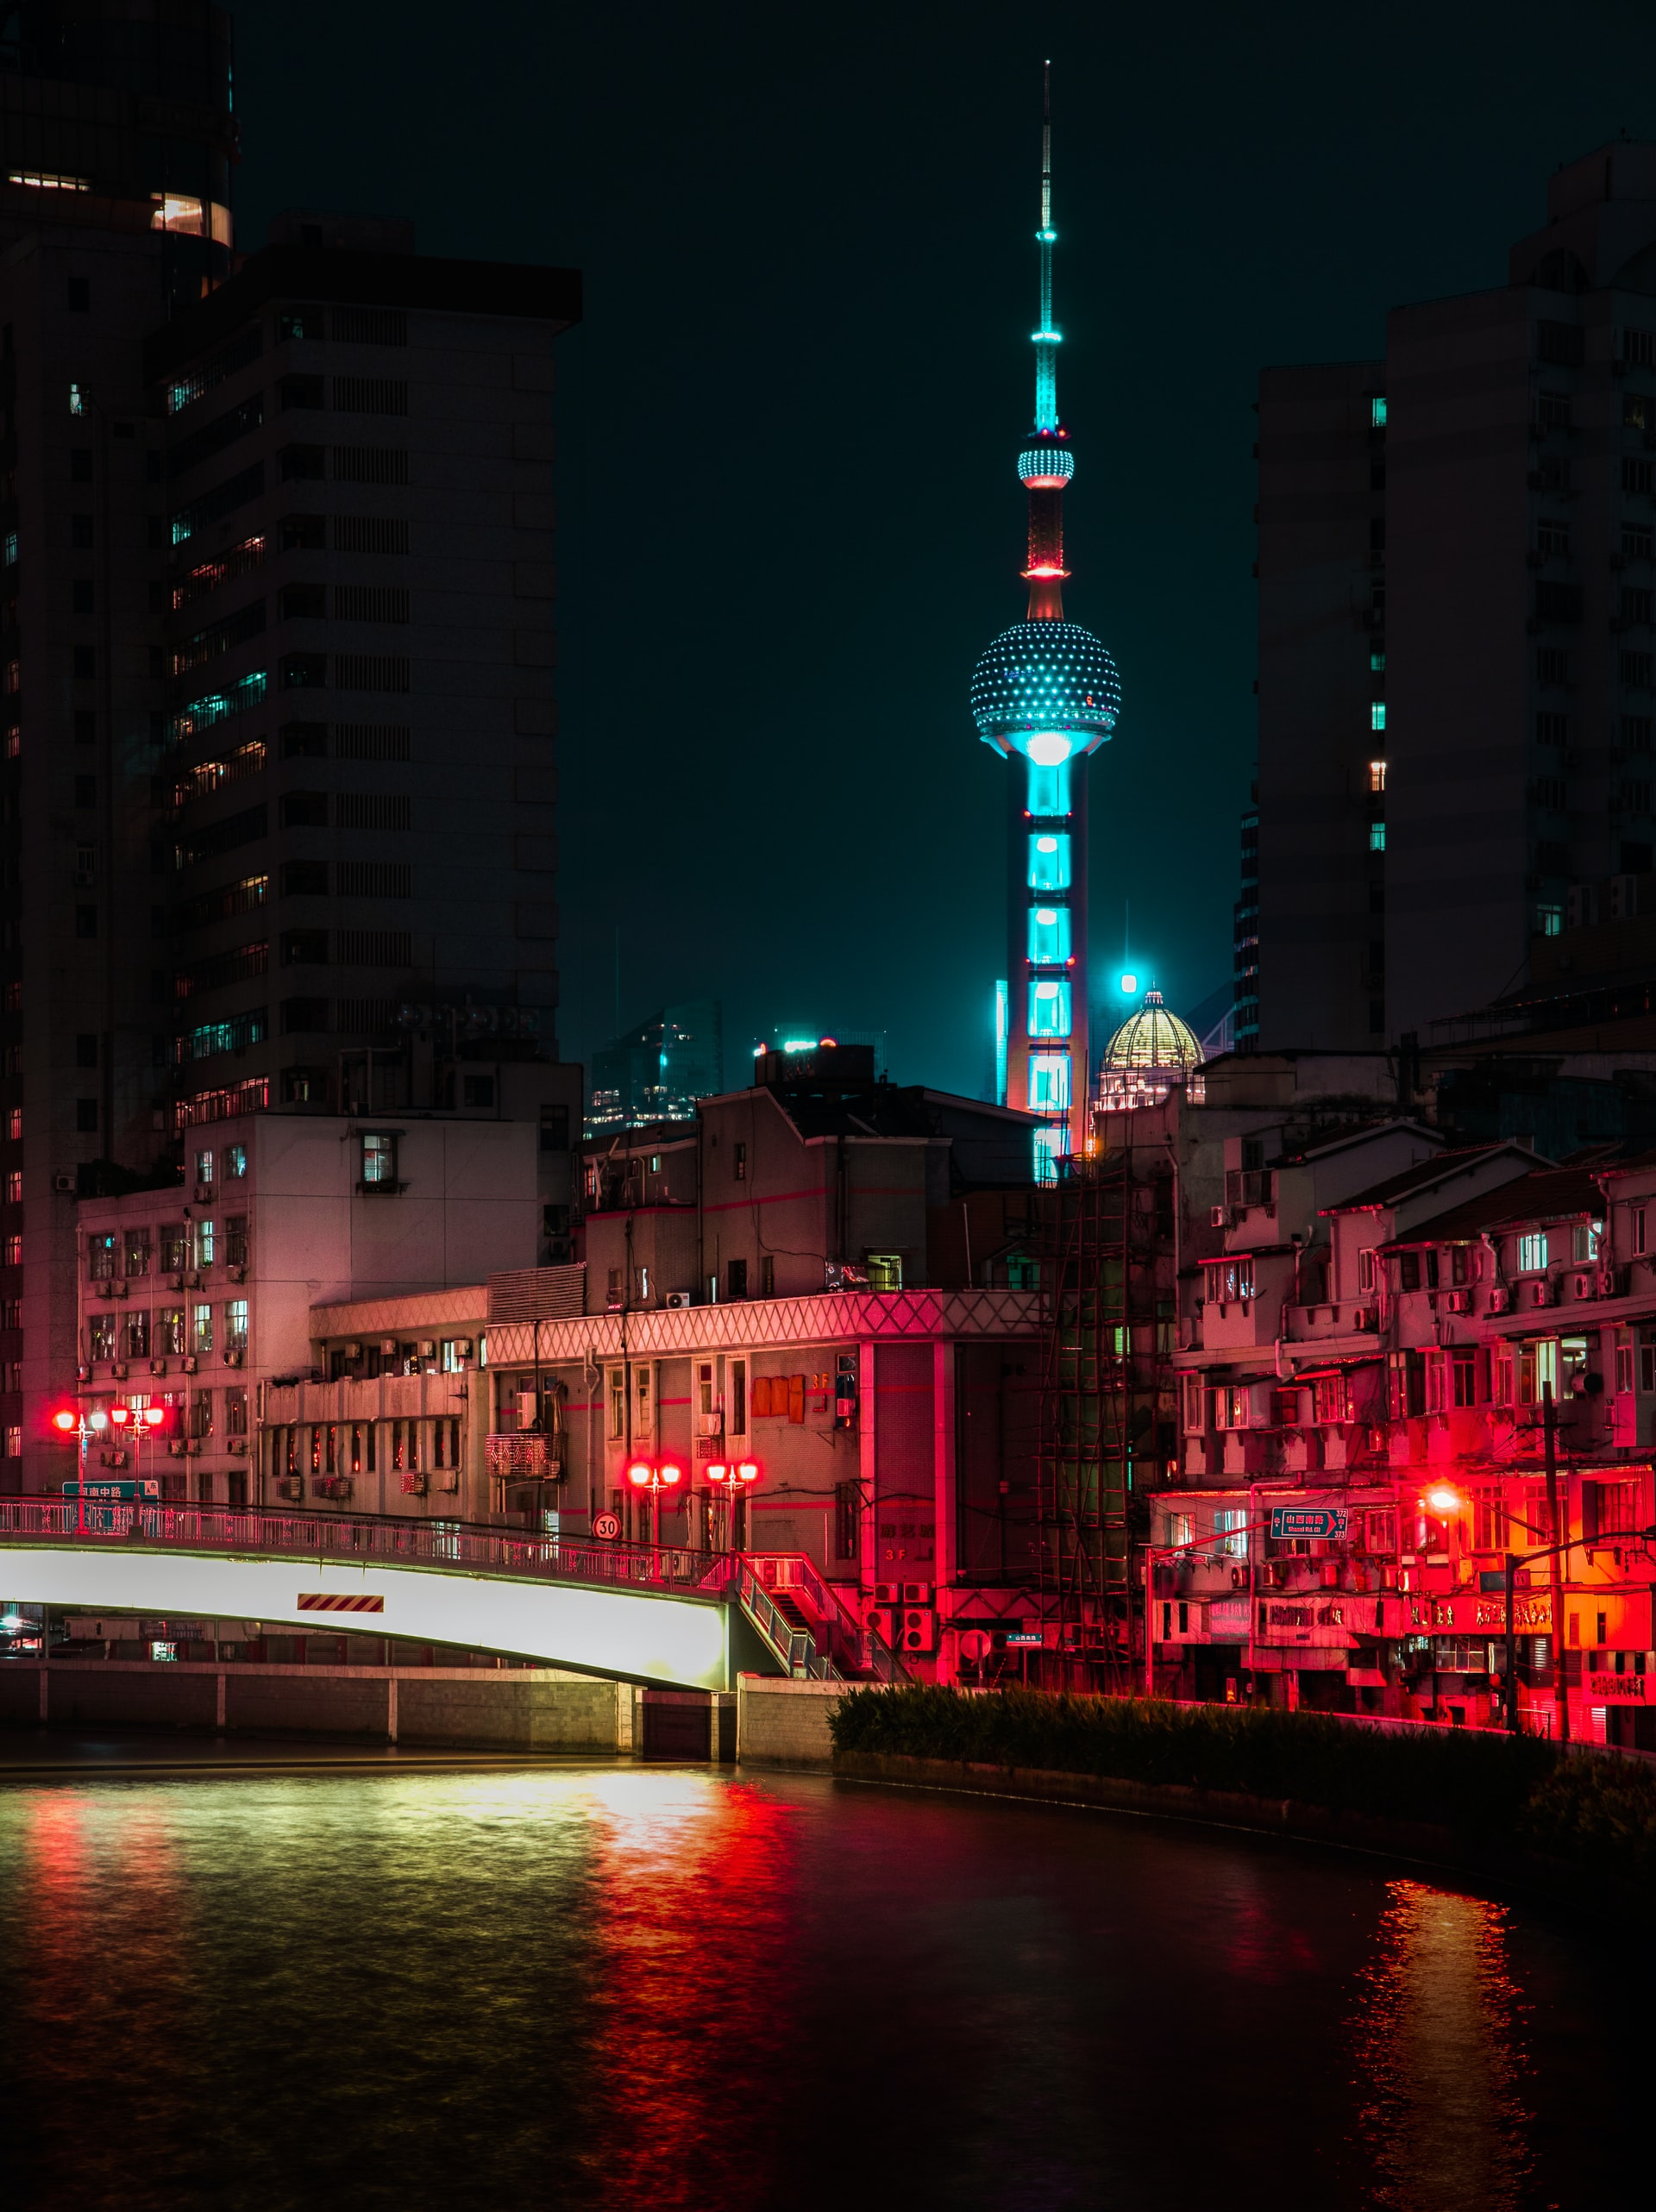 Nighttime Lit Up View Of The Oriental Pearl Tower